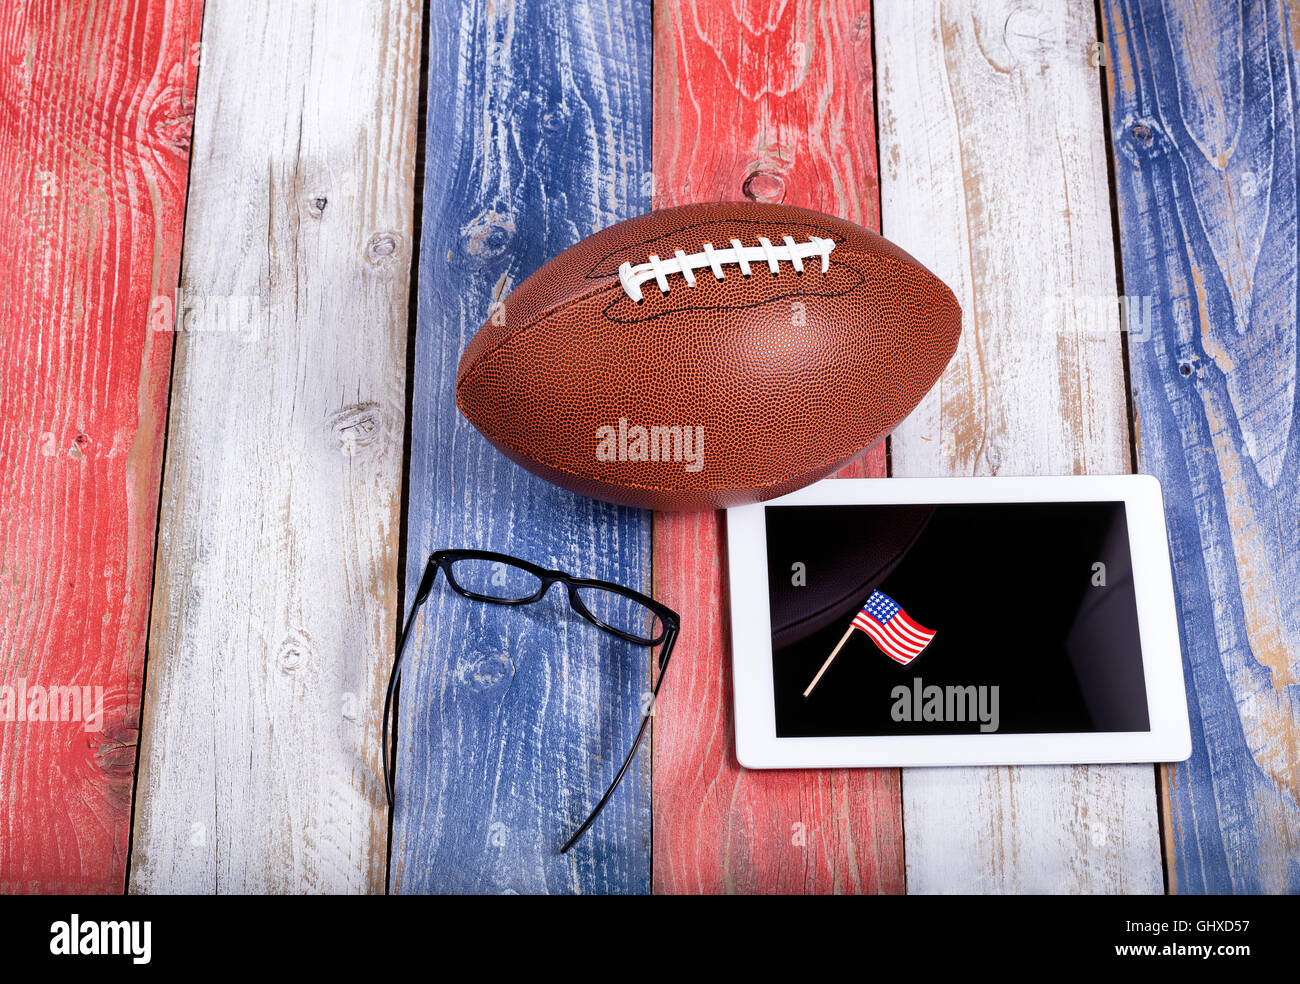 Overhead view of mobile computer, reading glasses, and American football on red, white and blue rustic wooden boards. Stock Photo